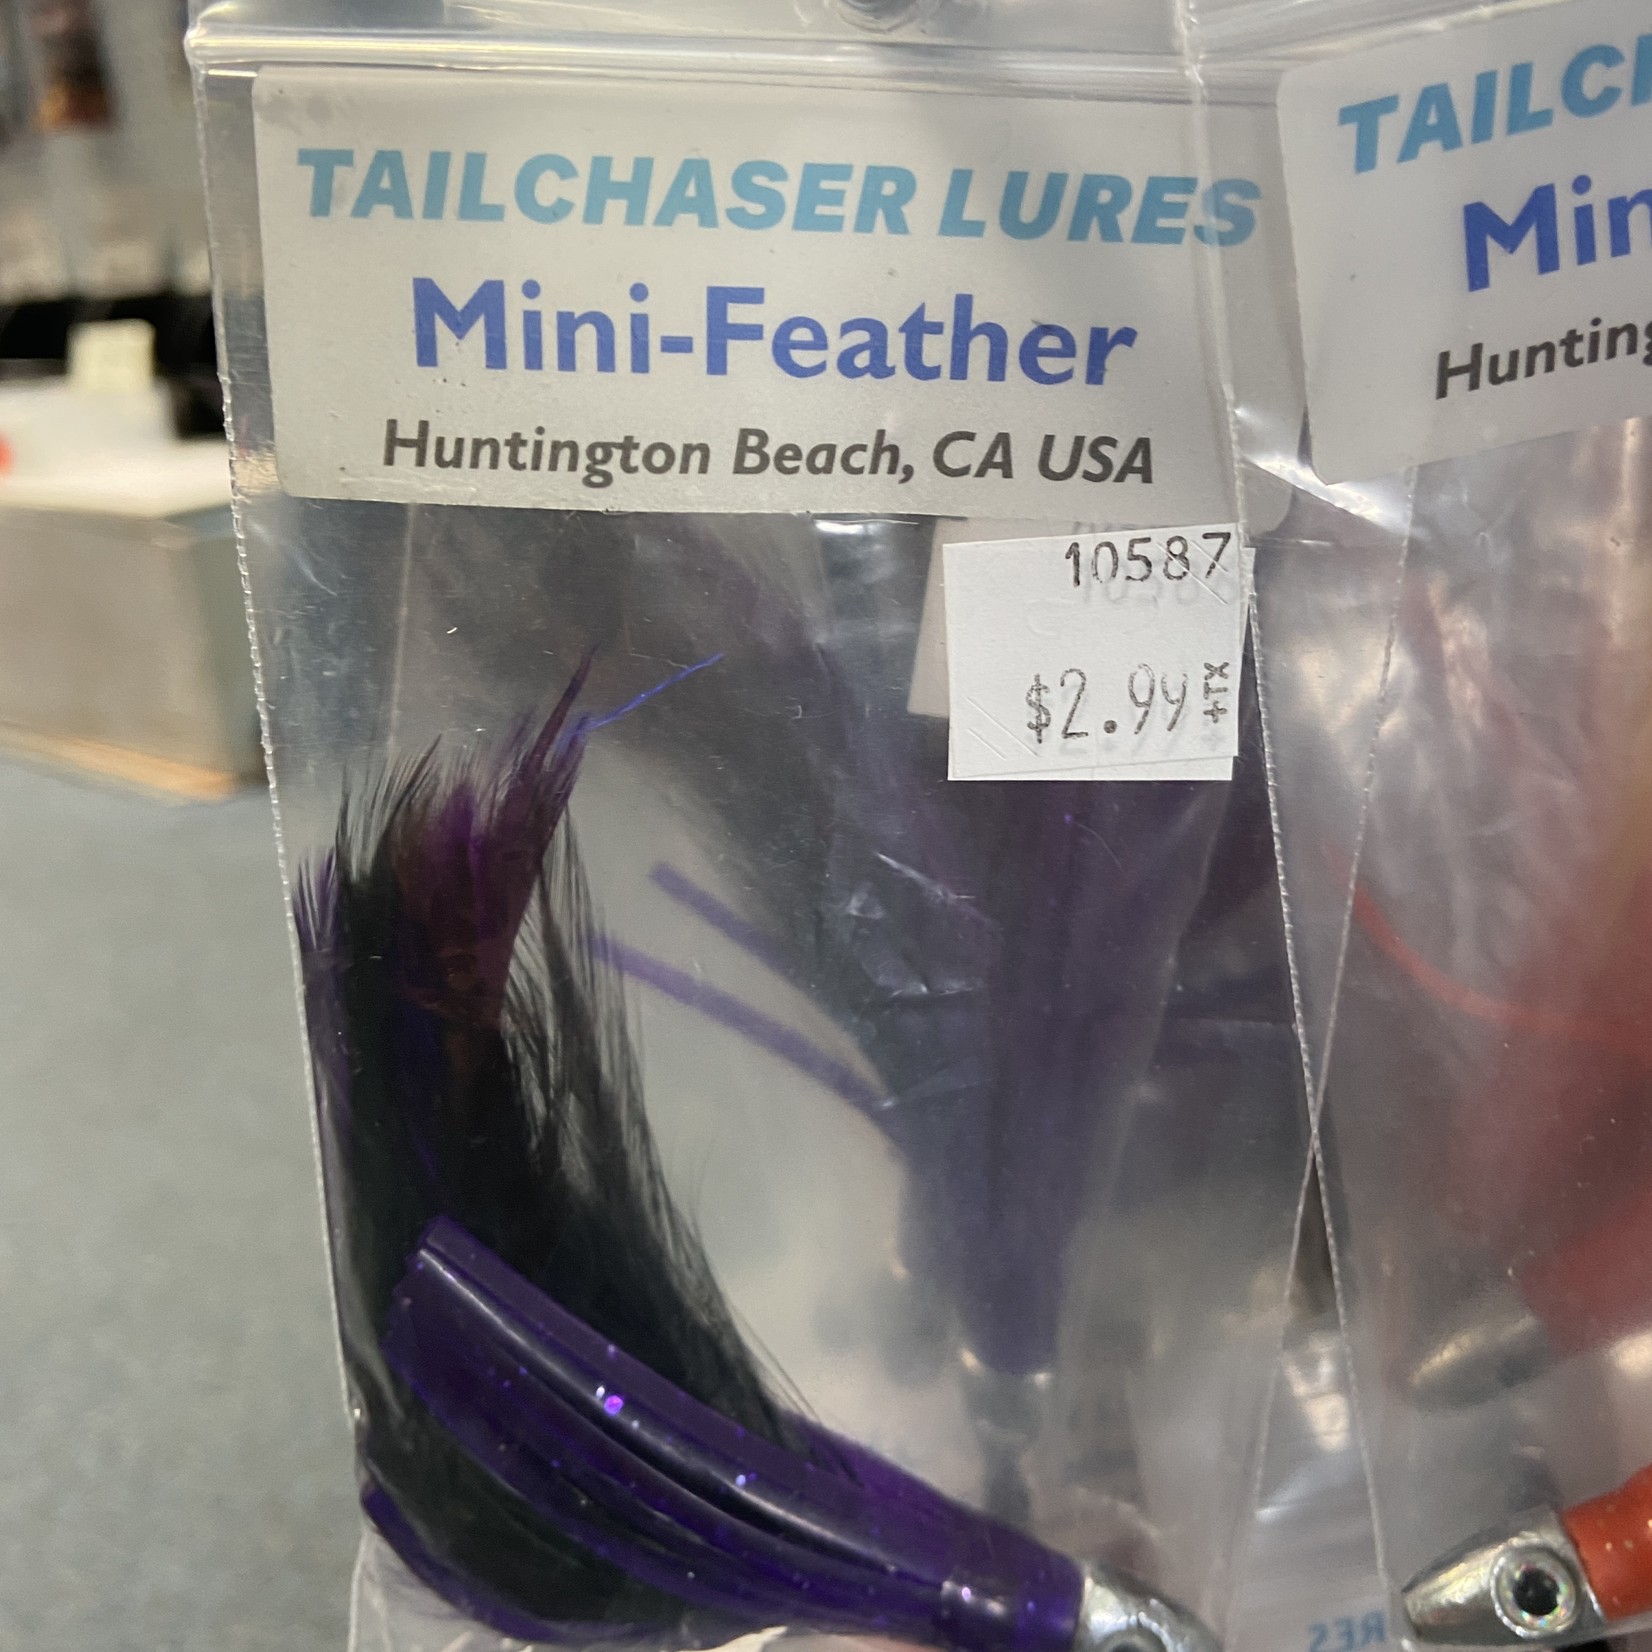 Tailchaser Lures - Mini Feather